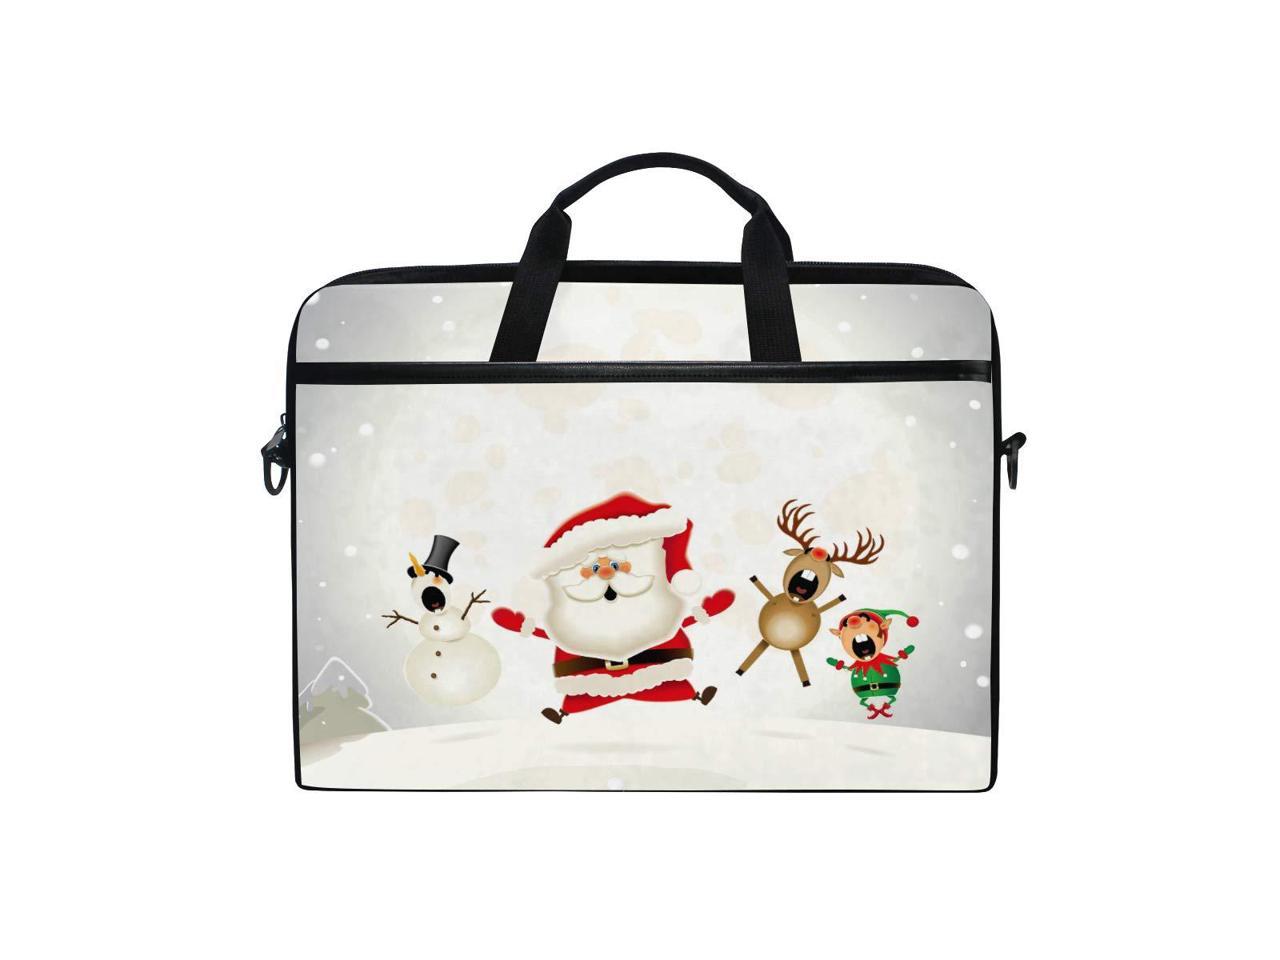 ALAZA Merry Christmas Snowman and Santa Claus 15 inch Laptop Case Shoulder Bag Crossbody Briefcase Messenger Sleeve for Women Men Girls Boys with Shoulder Strap Handle for Her Him